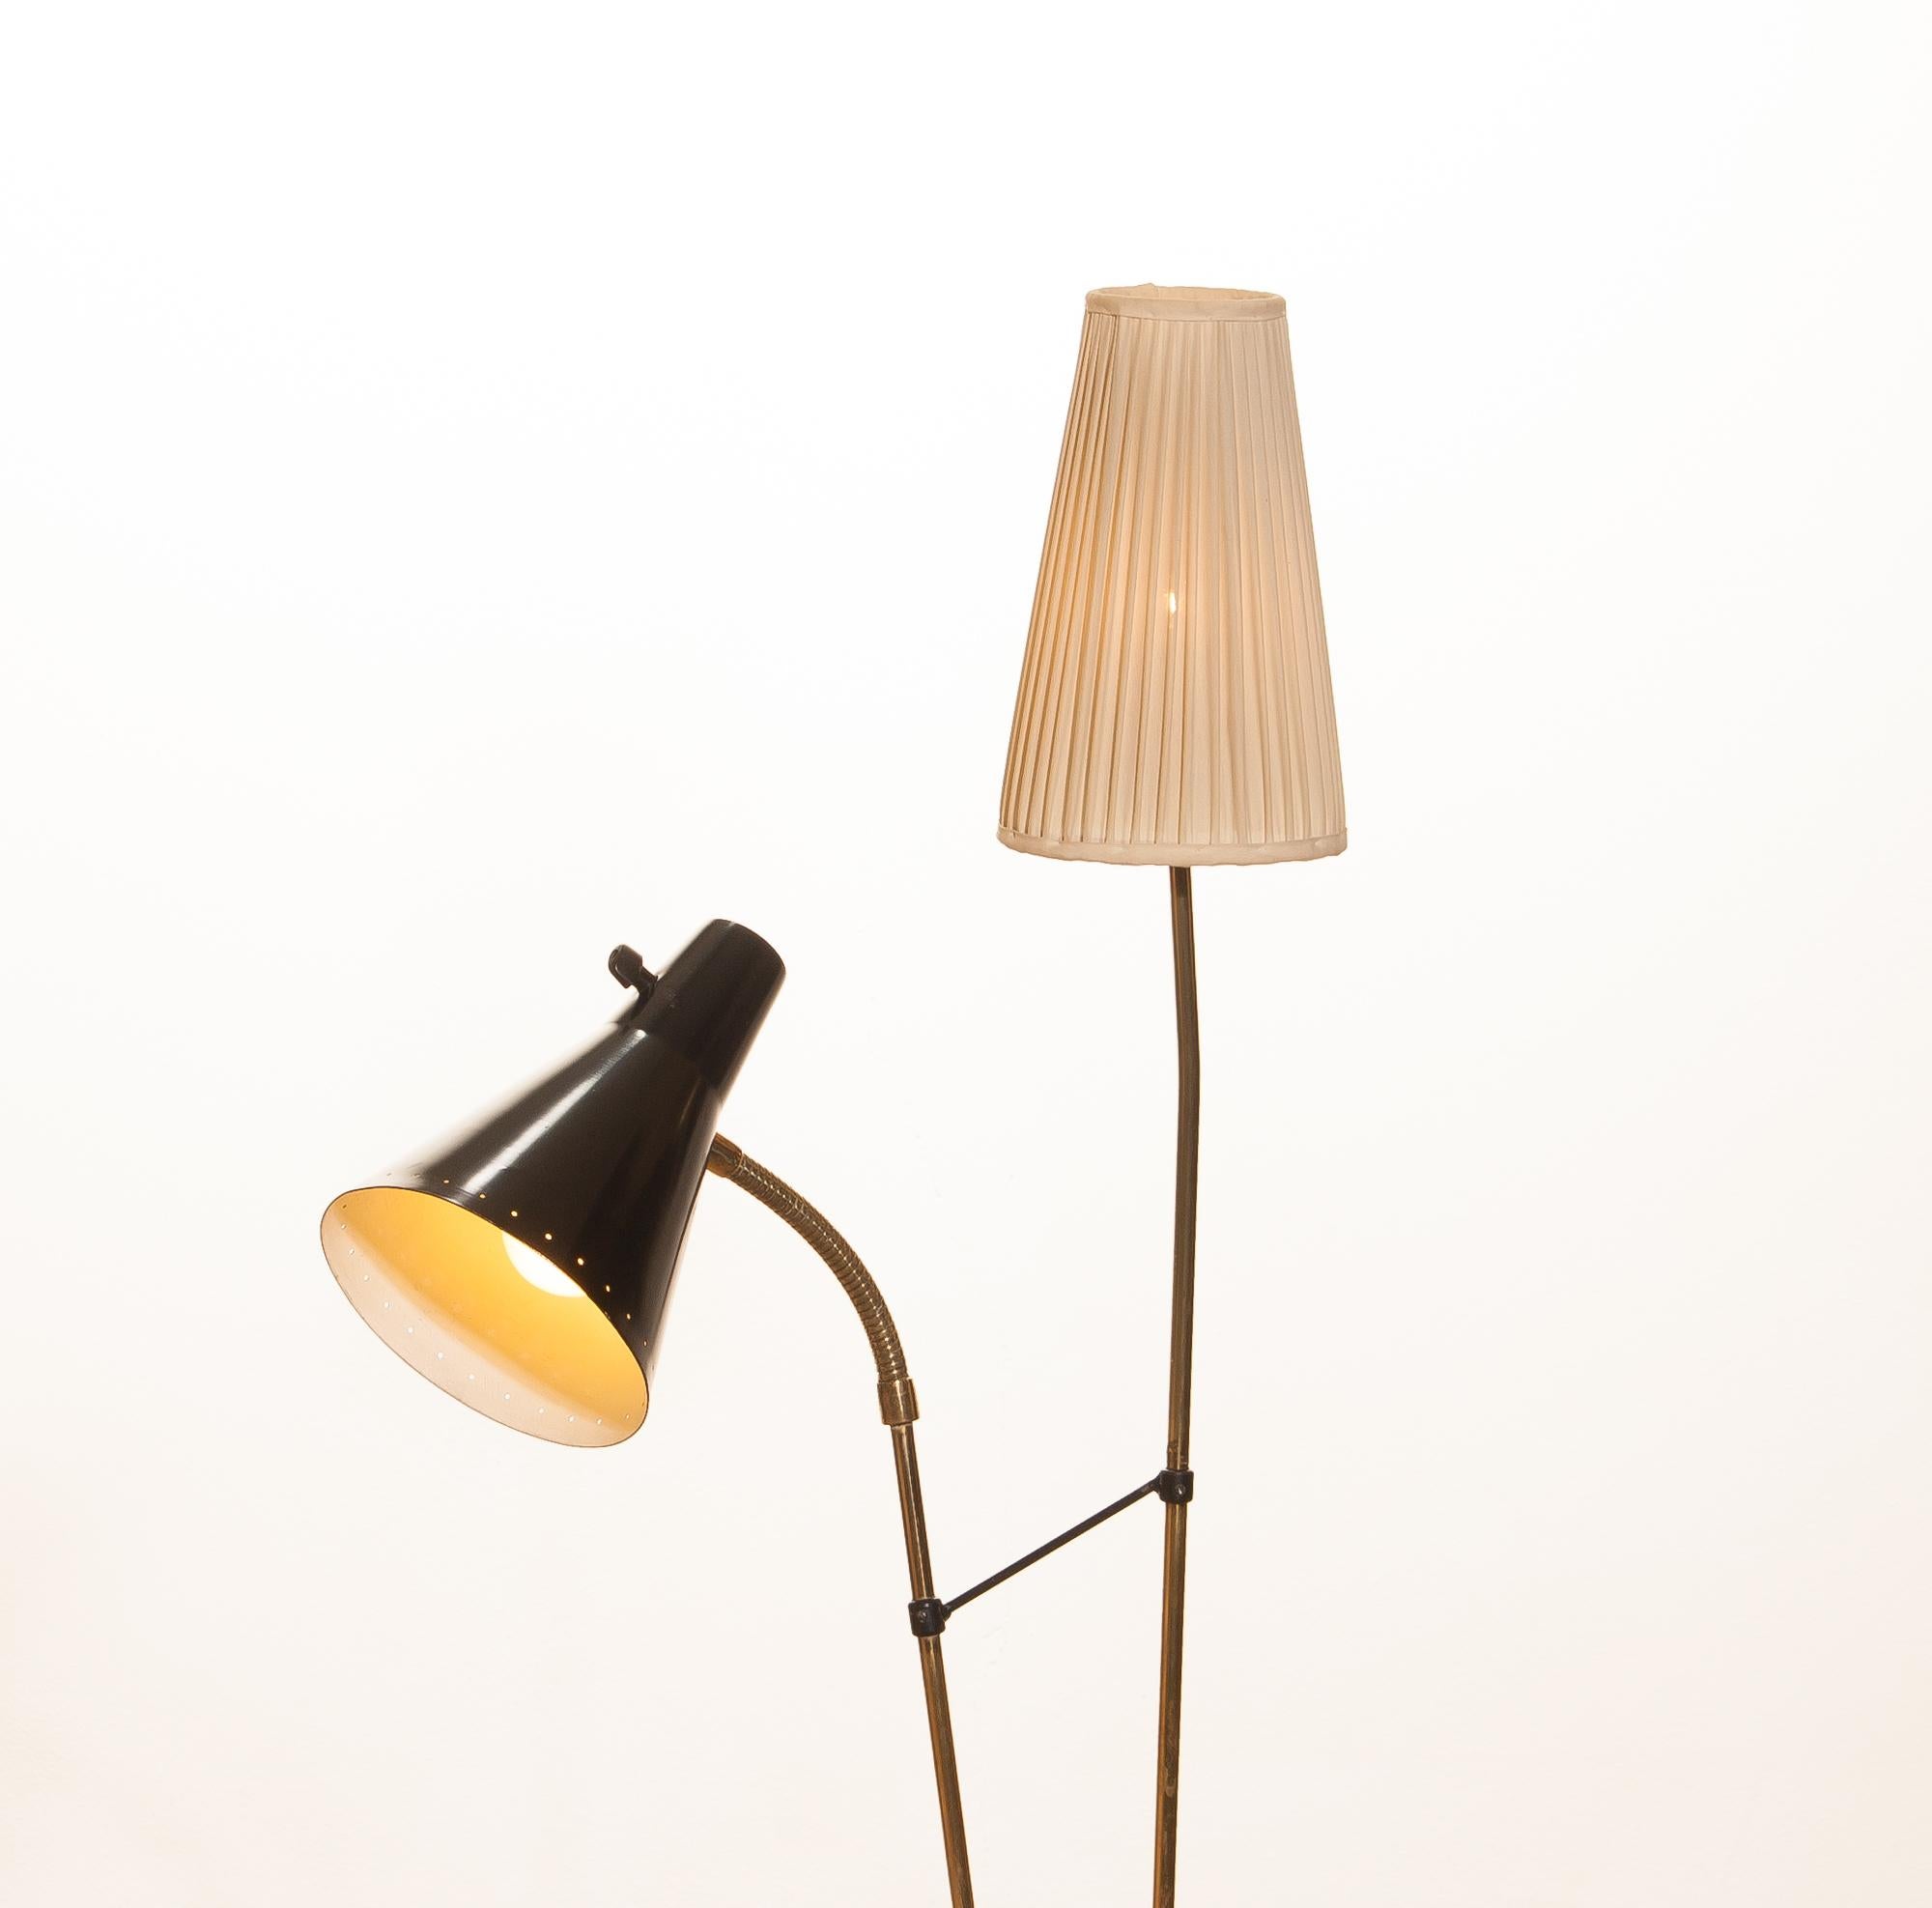 Beautiful floor lamp designed by Hans Bergström for Ateljé Lyktan, Sweden.
This lamp consists of two different shades; one black lacquered metal and one off-white fabric. The stand is made of brass with a beautiful rare foot. It is in a very nice